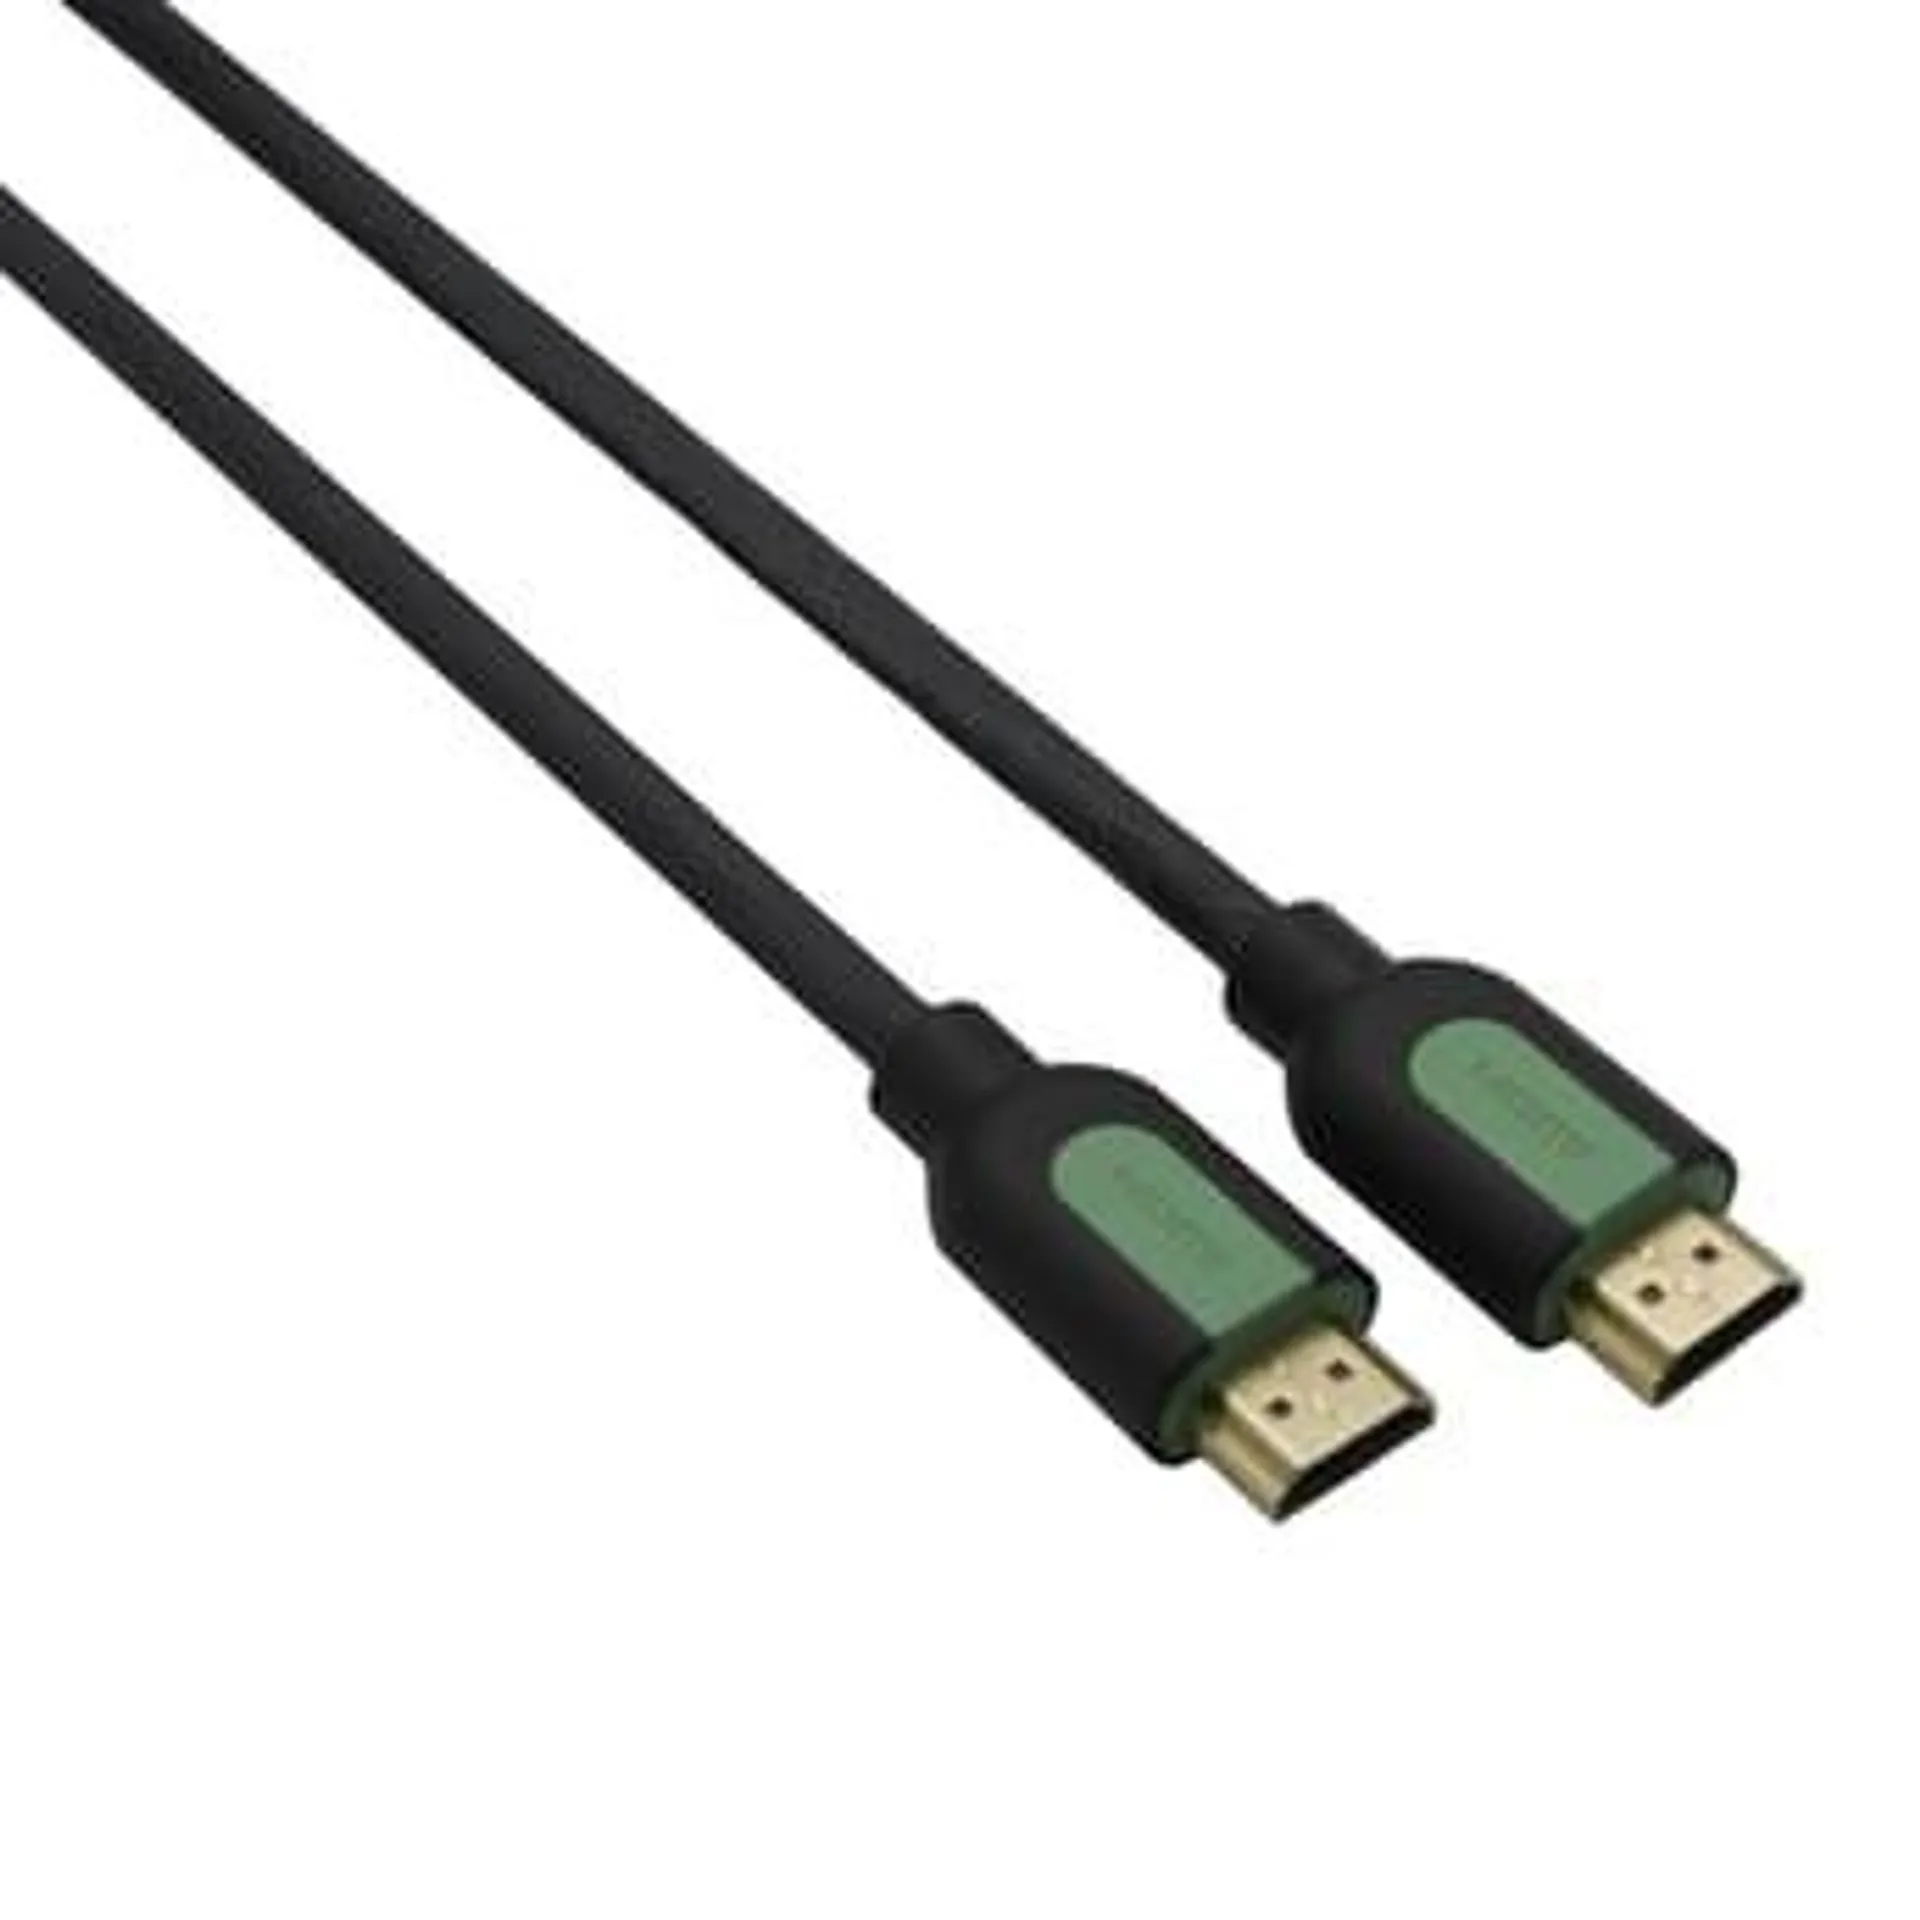 GIZZU High-Speed V2.0 HDMI Cable (1m)